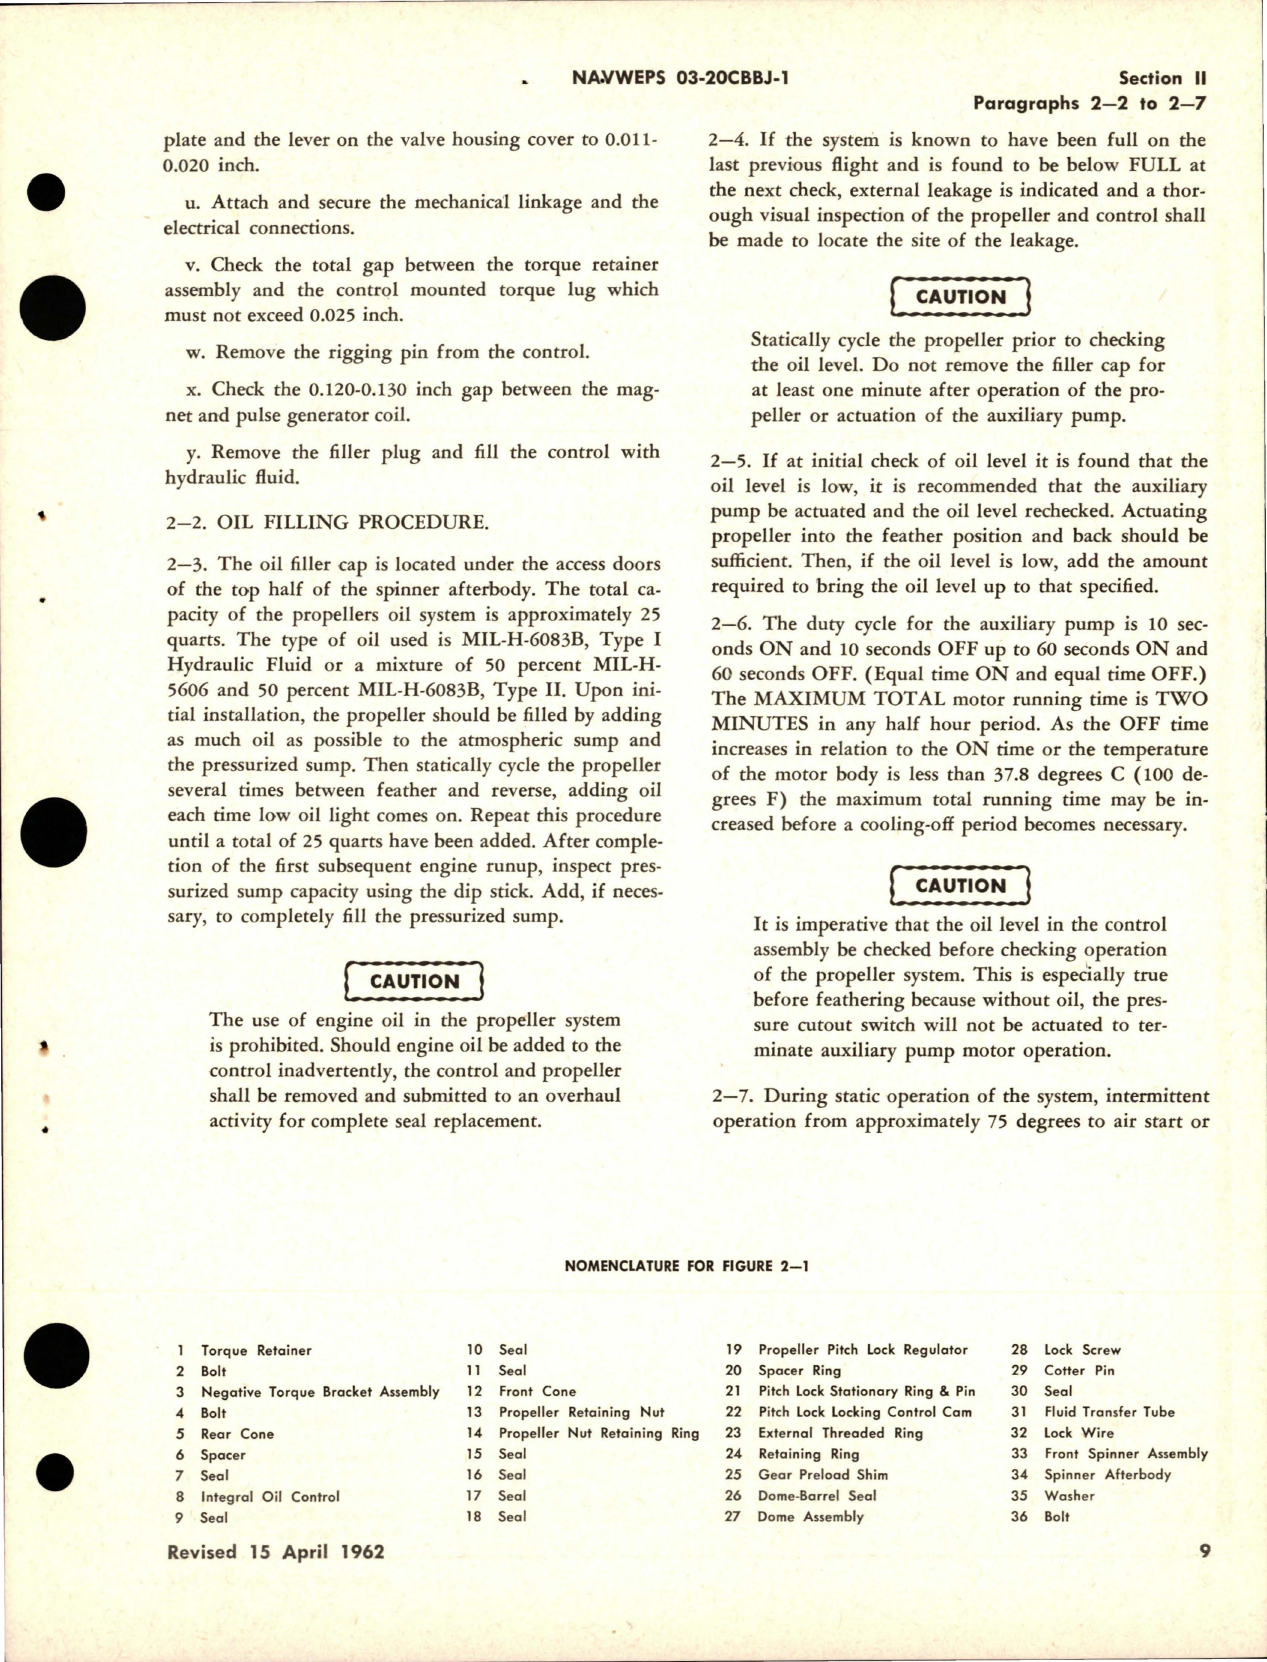 Sample page 5 from AirCorps Library document: Operation and Maintenance Instructions for Variable Pitch Propeller - Models 54H60-69, 54H60-73, 54H60-75, 54H60-85, and 54H60-89